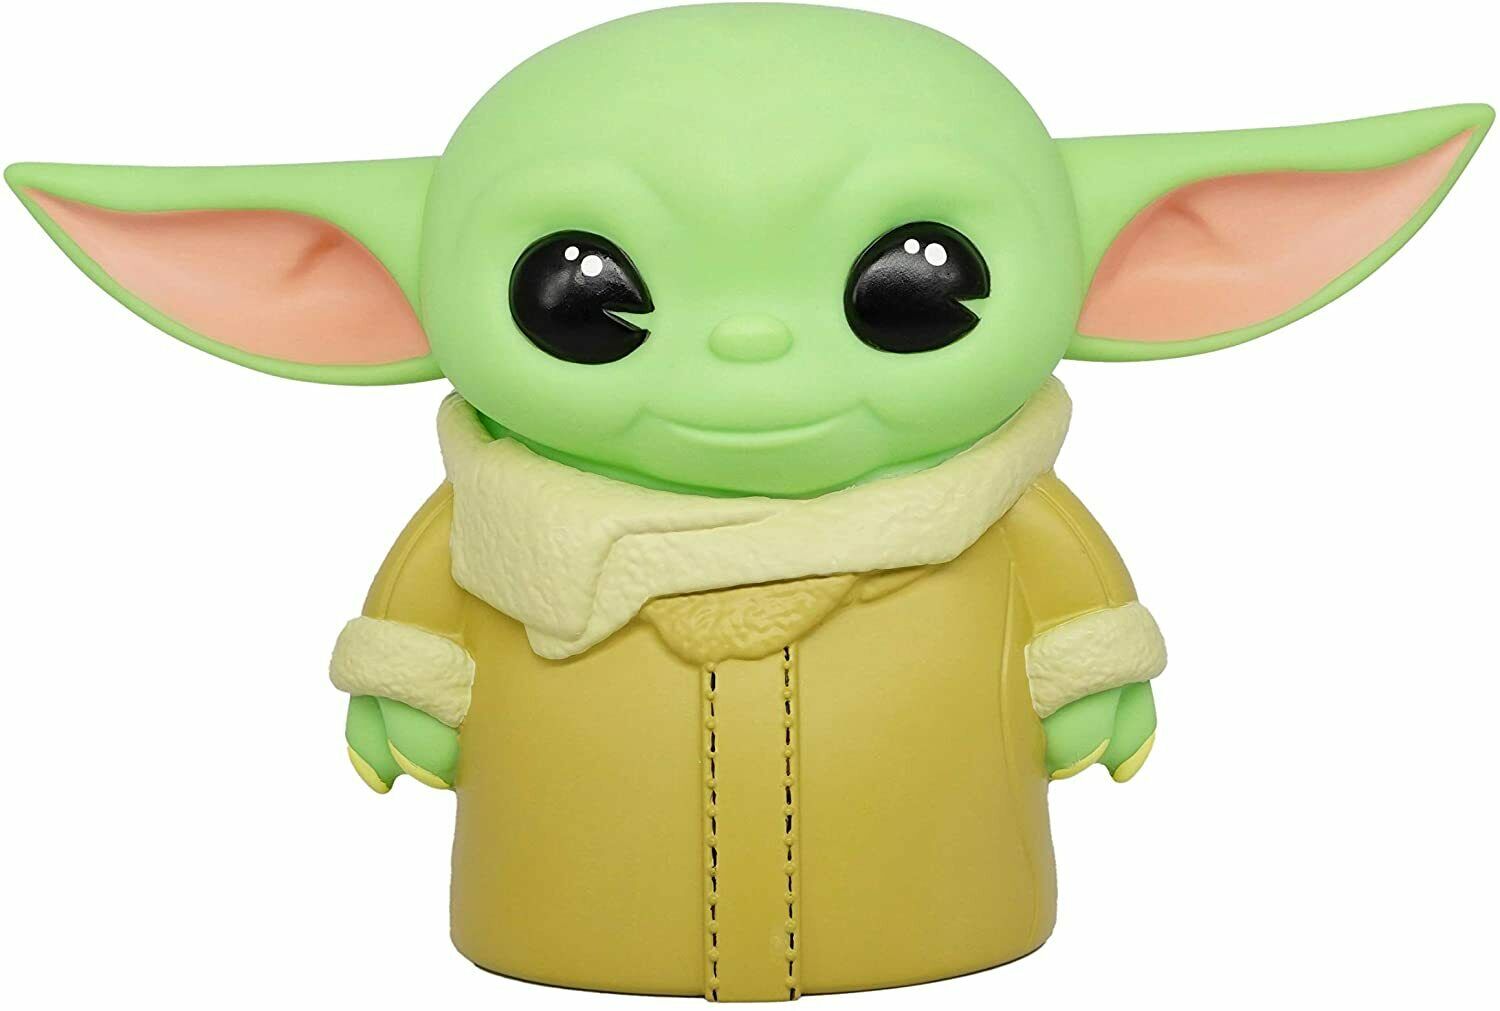 Star Wars The Mandalorian The Child PVC Coin Bank Baby Yoda FIGURINE | L.A. Mood Comics and Games